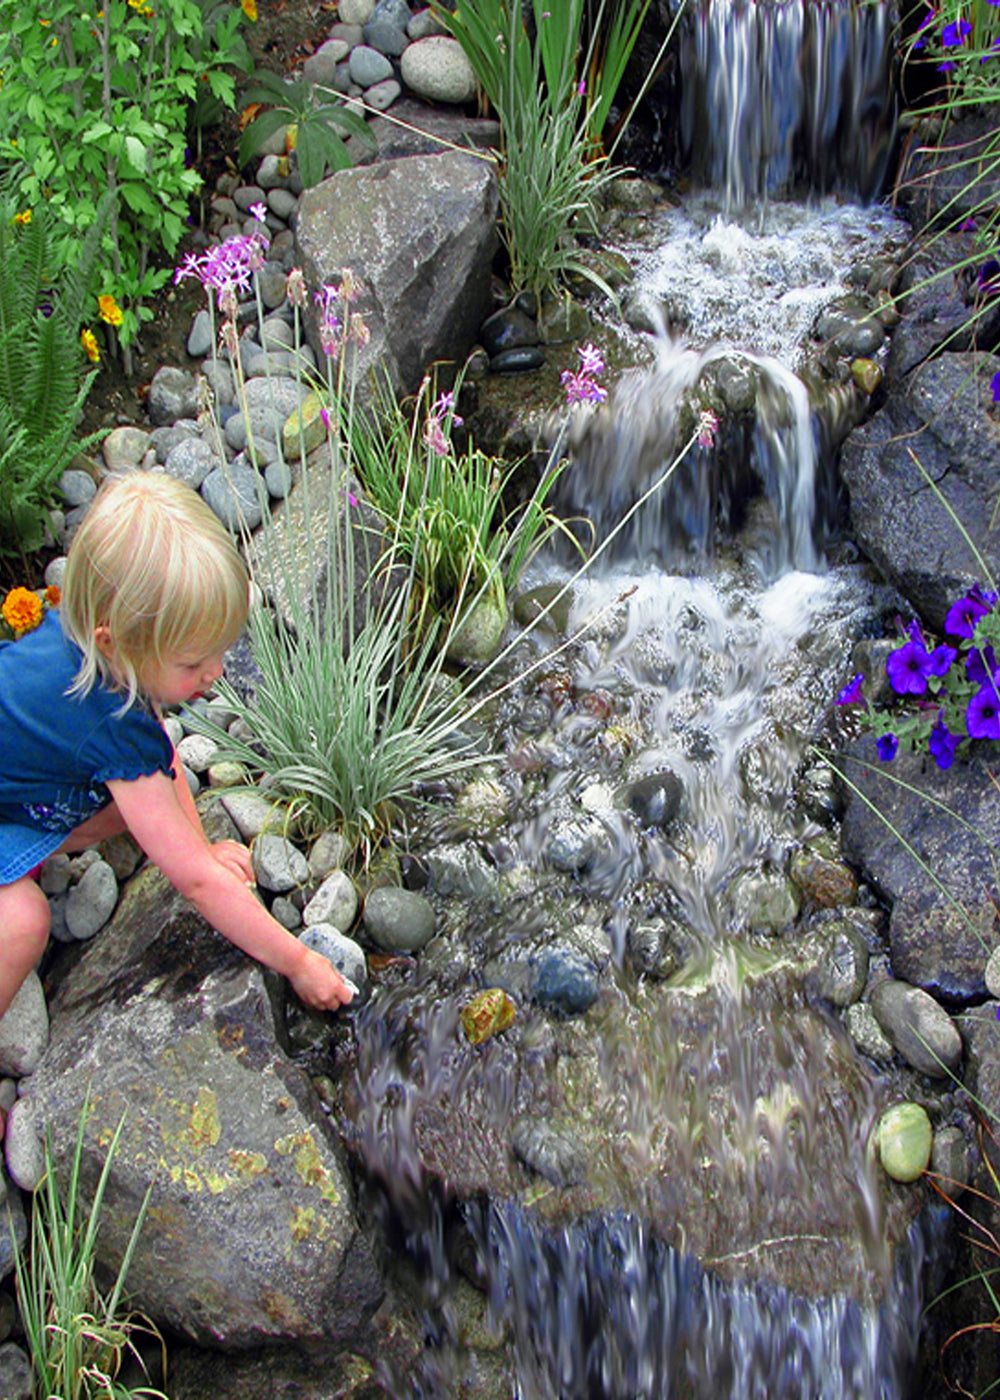 Three stepped waterfalls cascading over boulders with a child placing stones in the stream